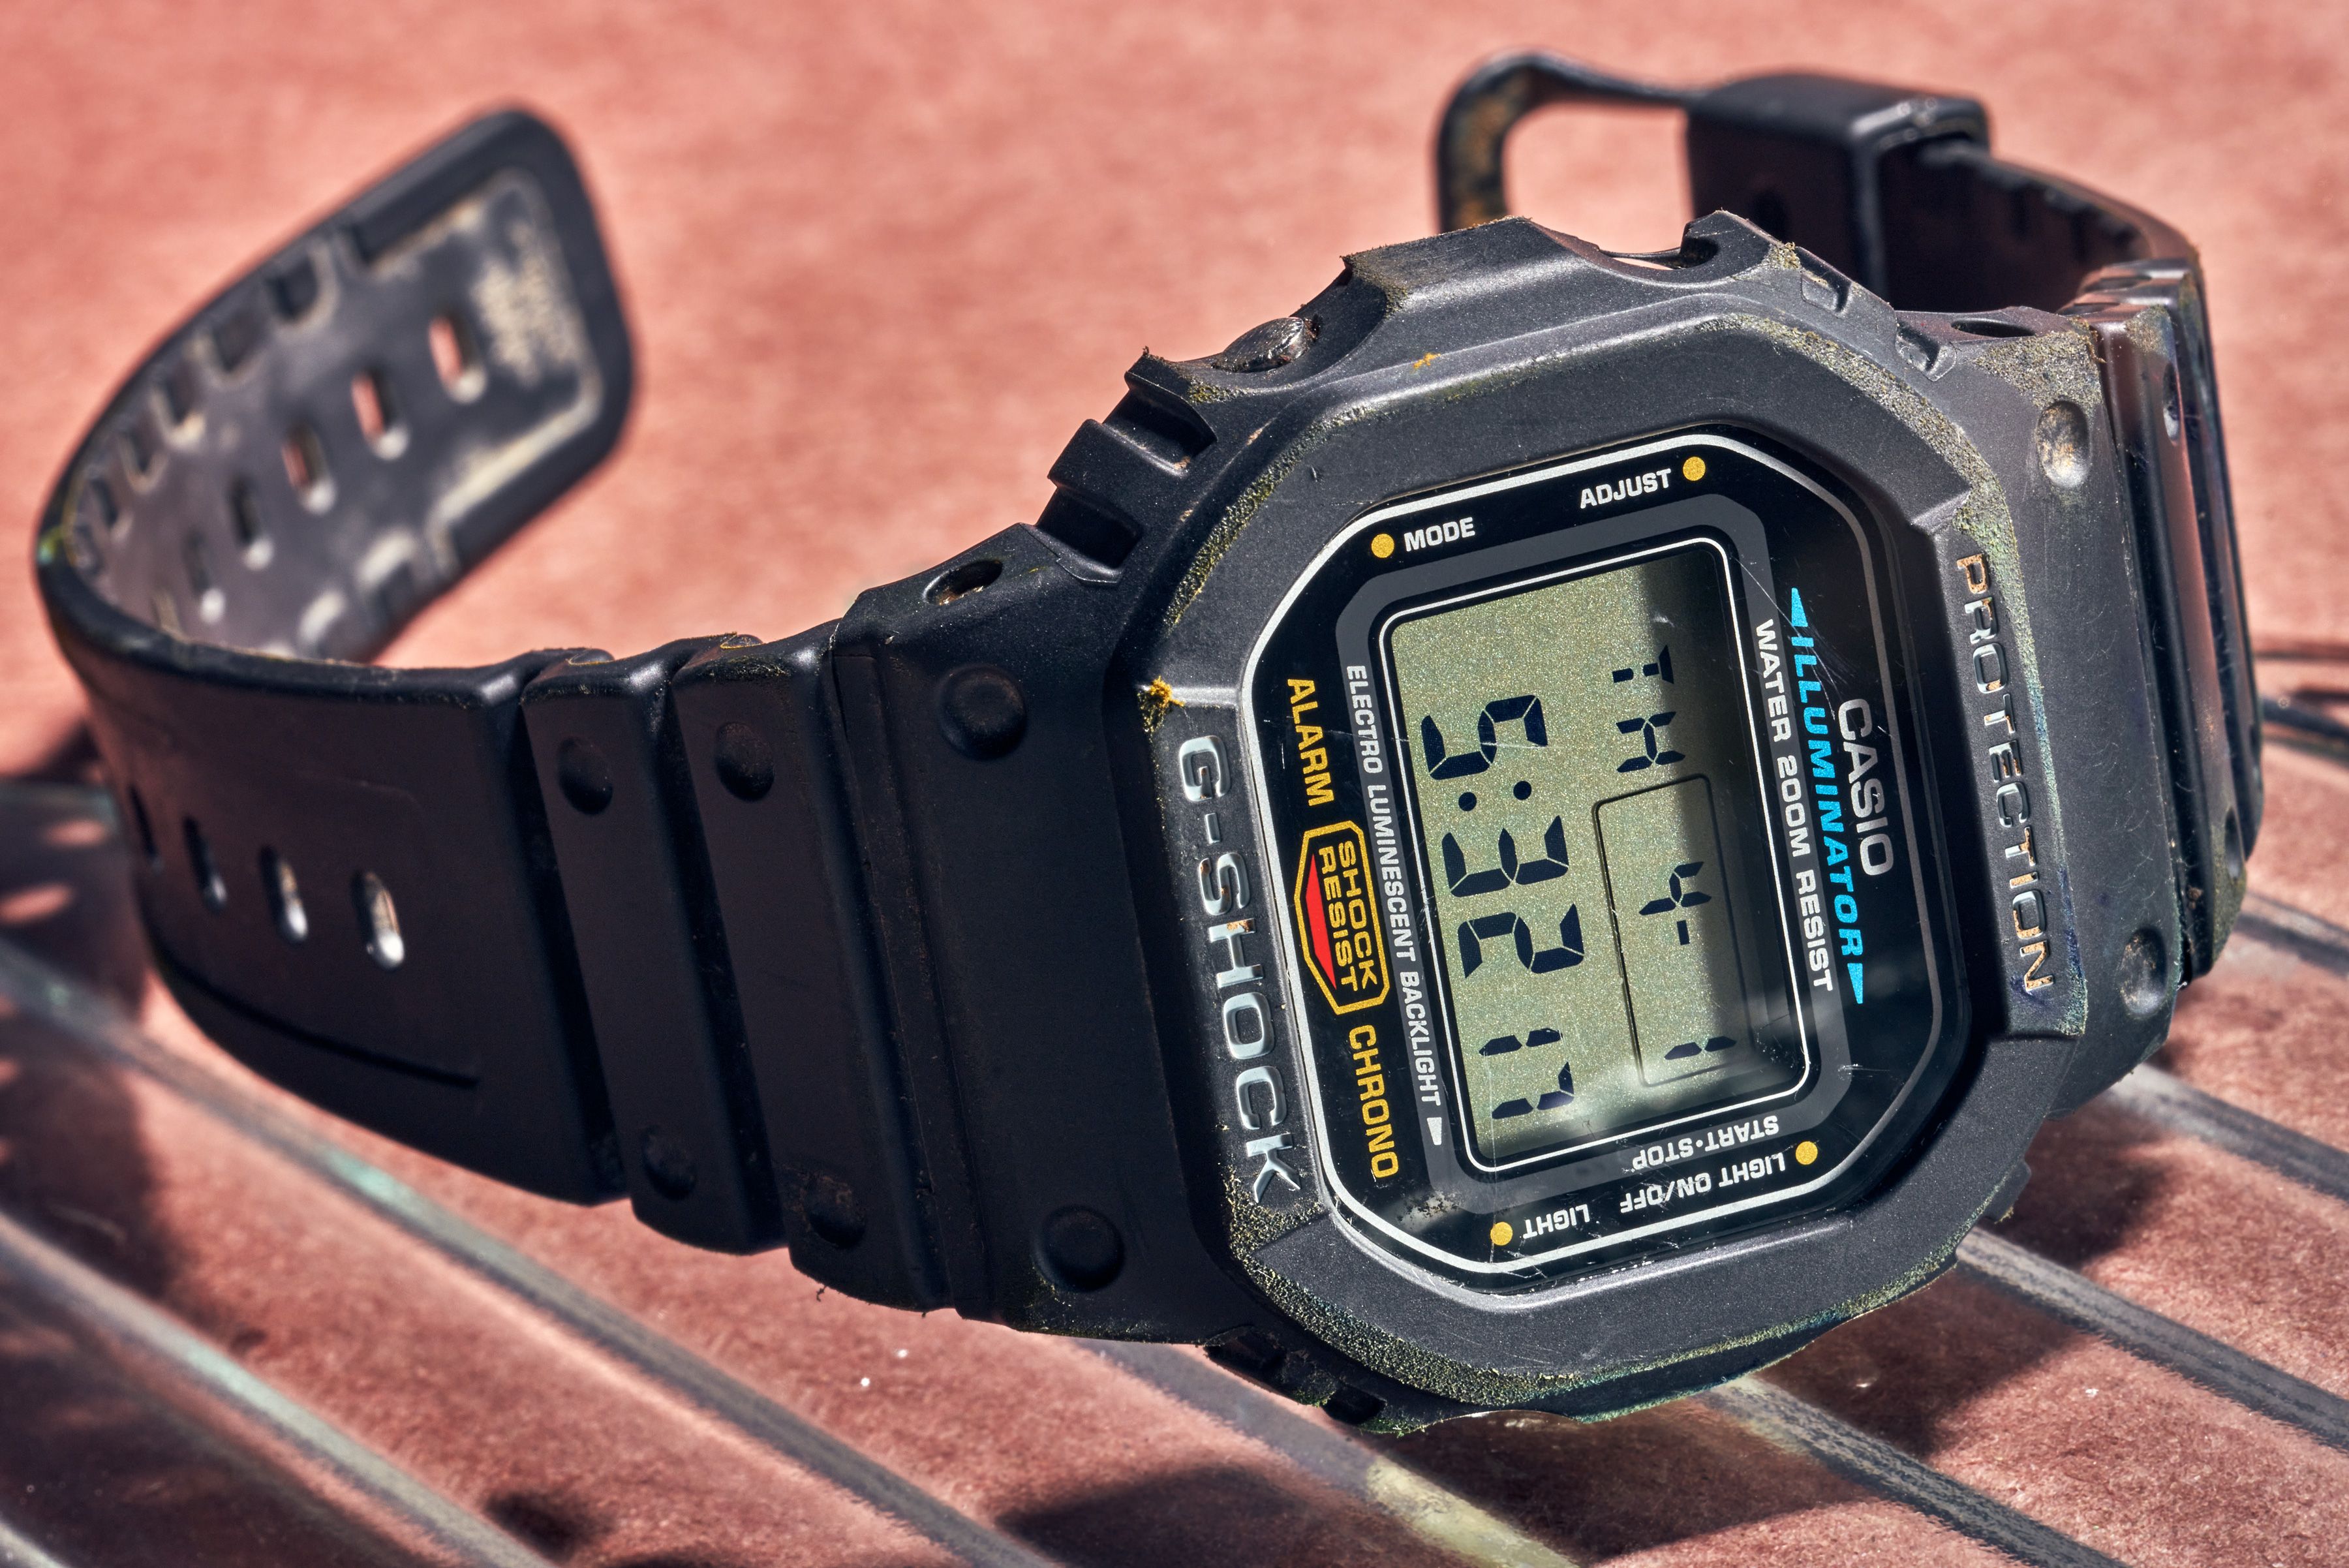 Nuclear Solitario once How the Casio G-Shock Became a Style Icon